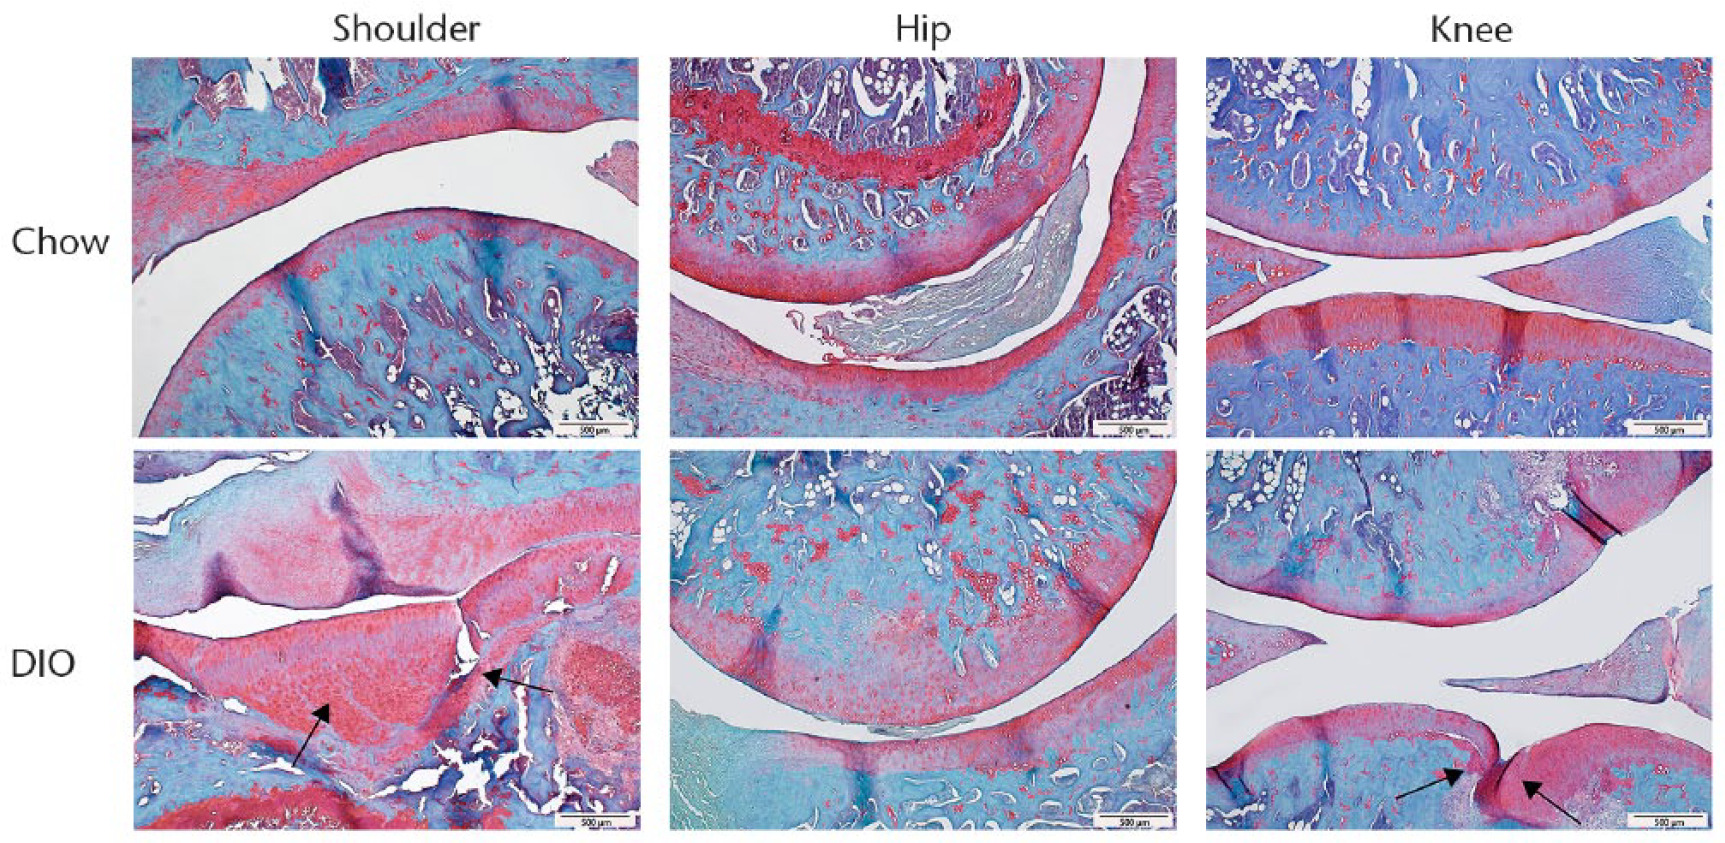 Fig. 2 
            Histology images taken at ×10, showing that DIO leads to increases in joint damage in shoulder and knee joints, but not hip joints. Scale bars indicate 500 μm. Black arrows indicate lesions.
          